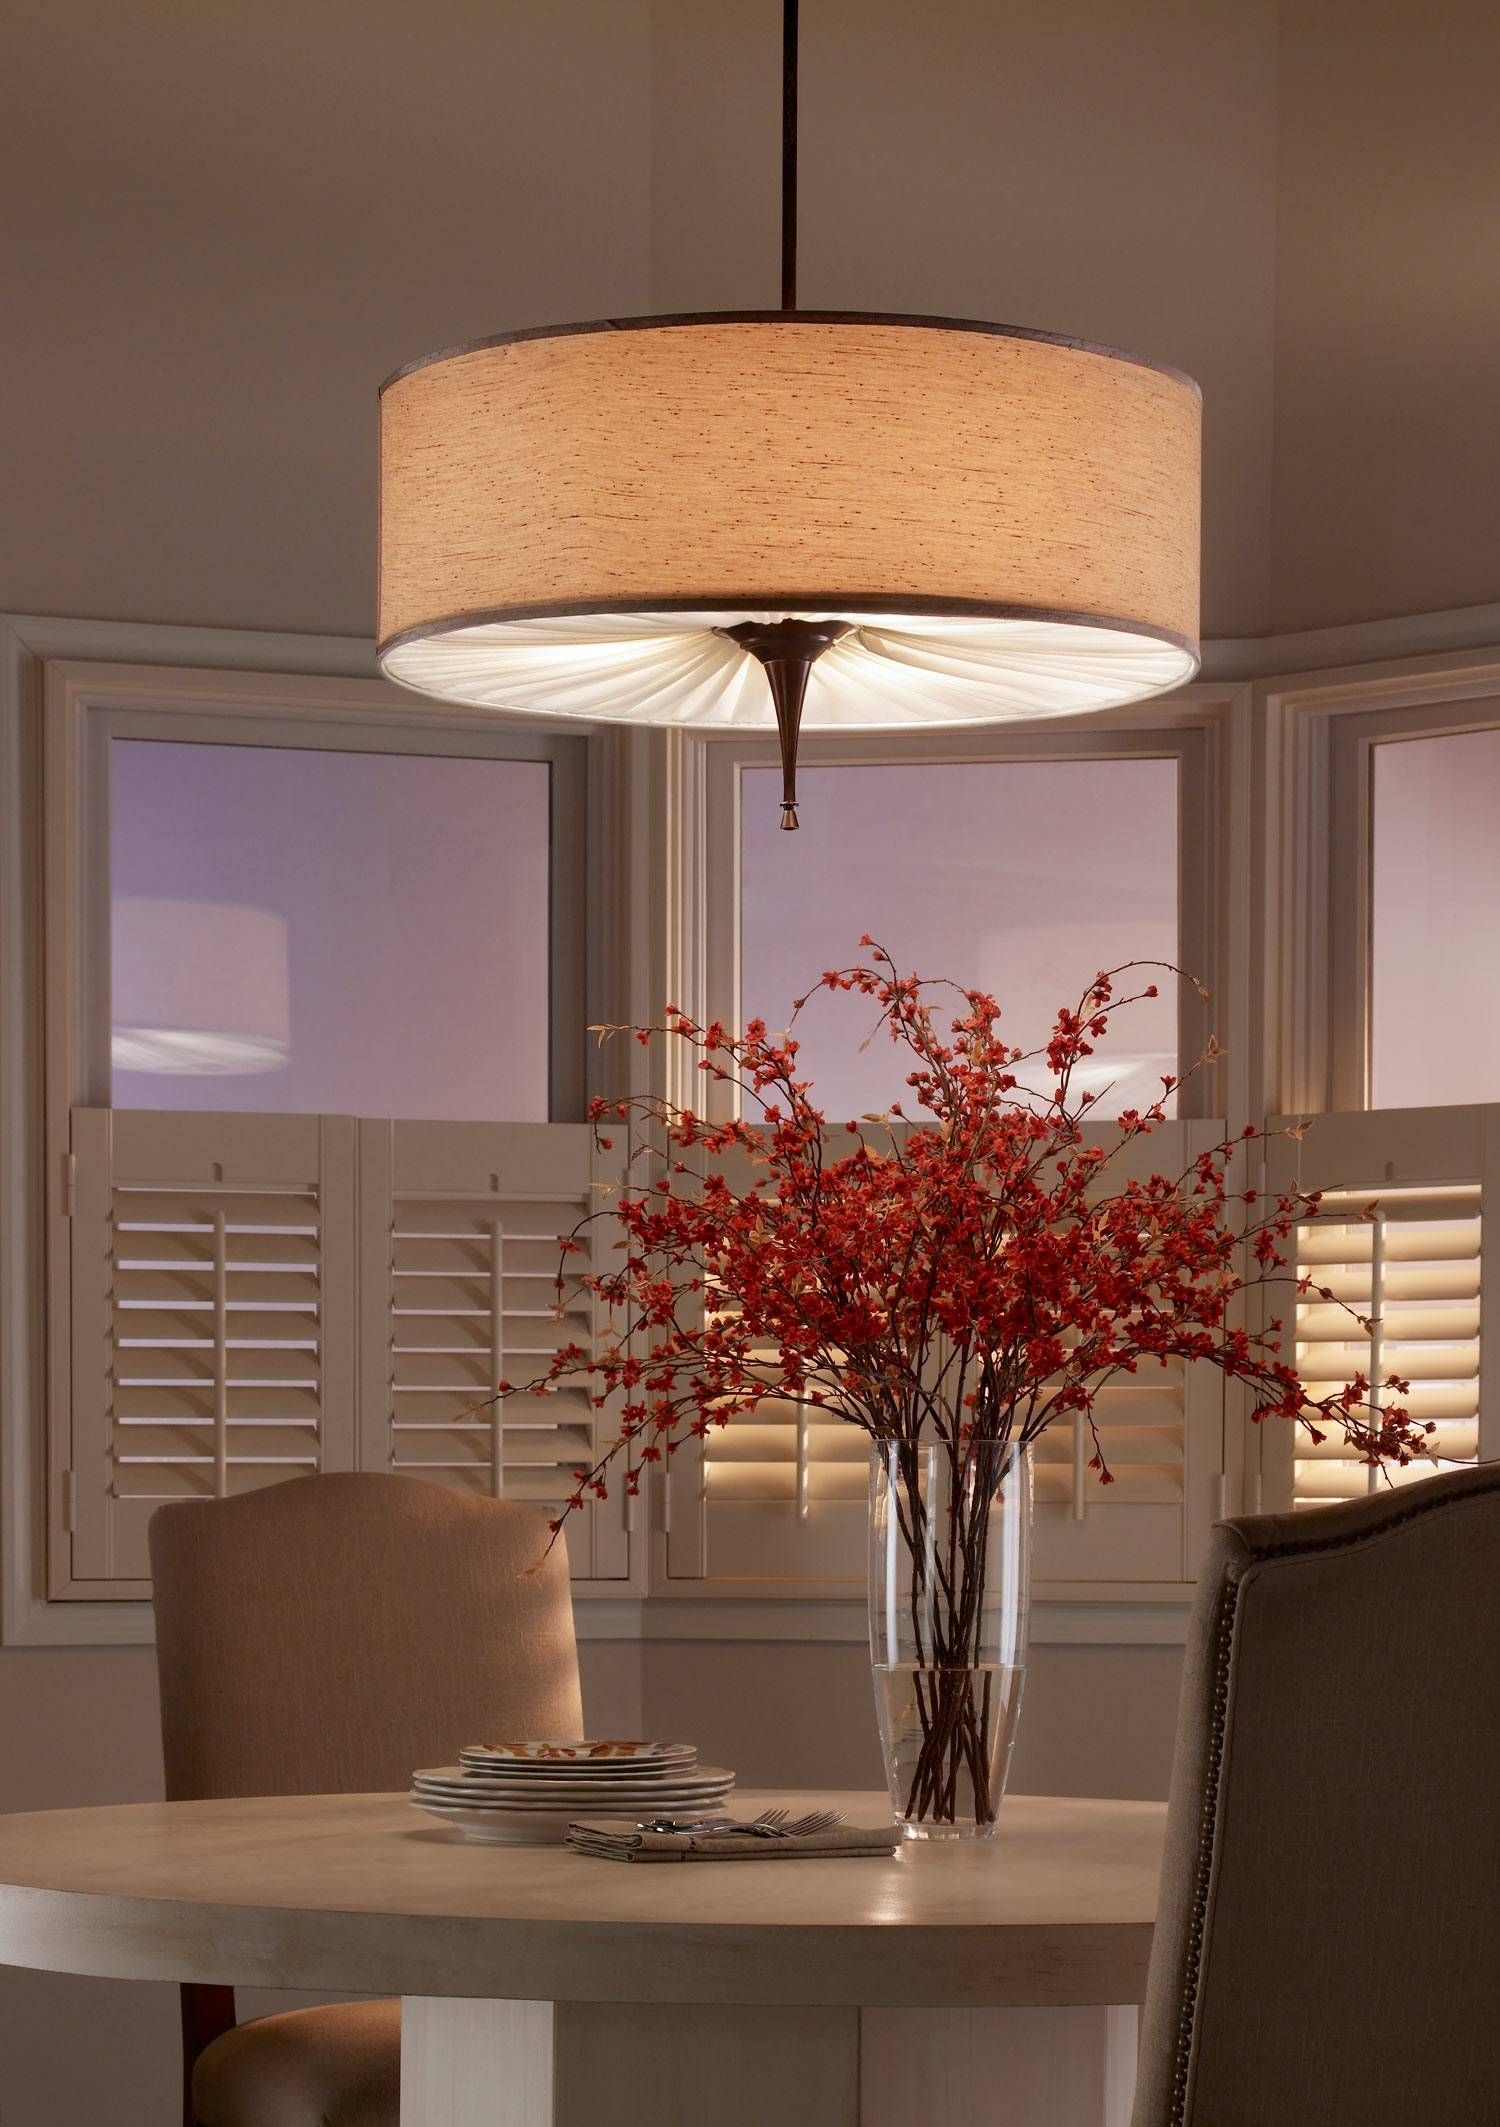 A Plan For Every Room | Thomas Lighting With Regard To Pendant Lighting With Matching Chandeliers (View 5 of 15)